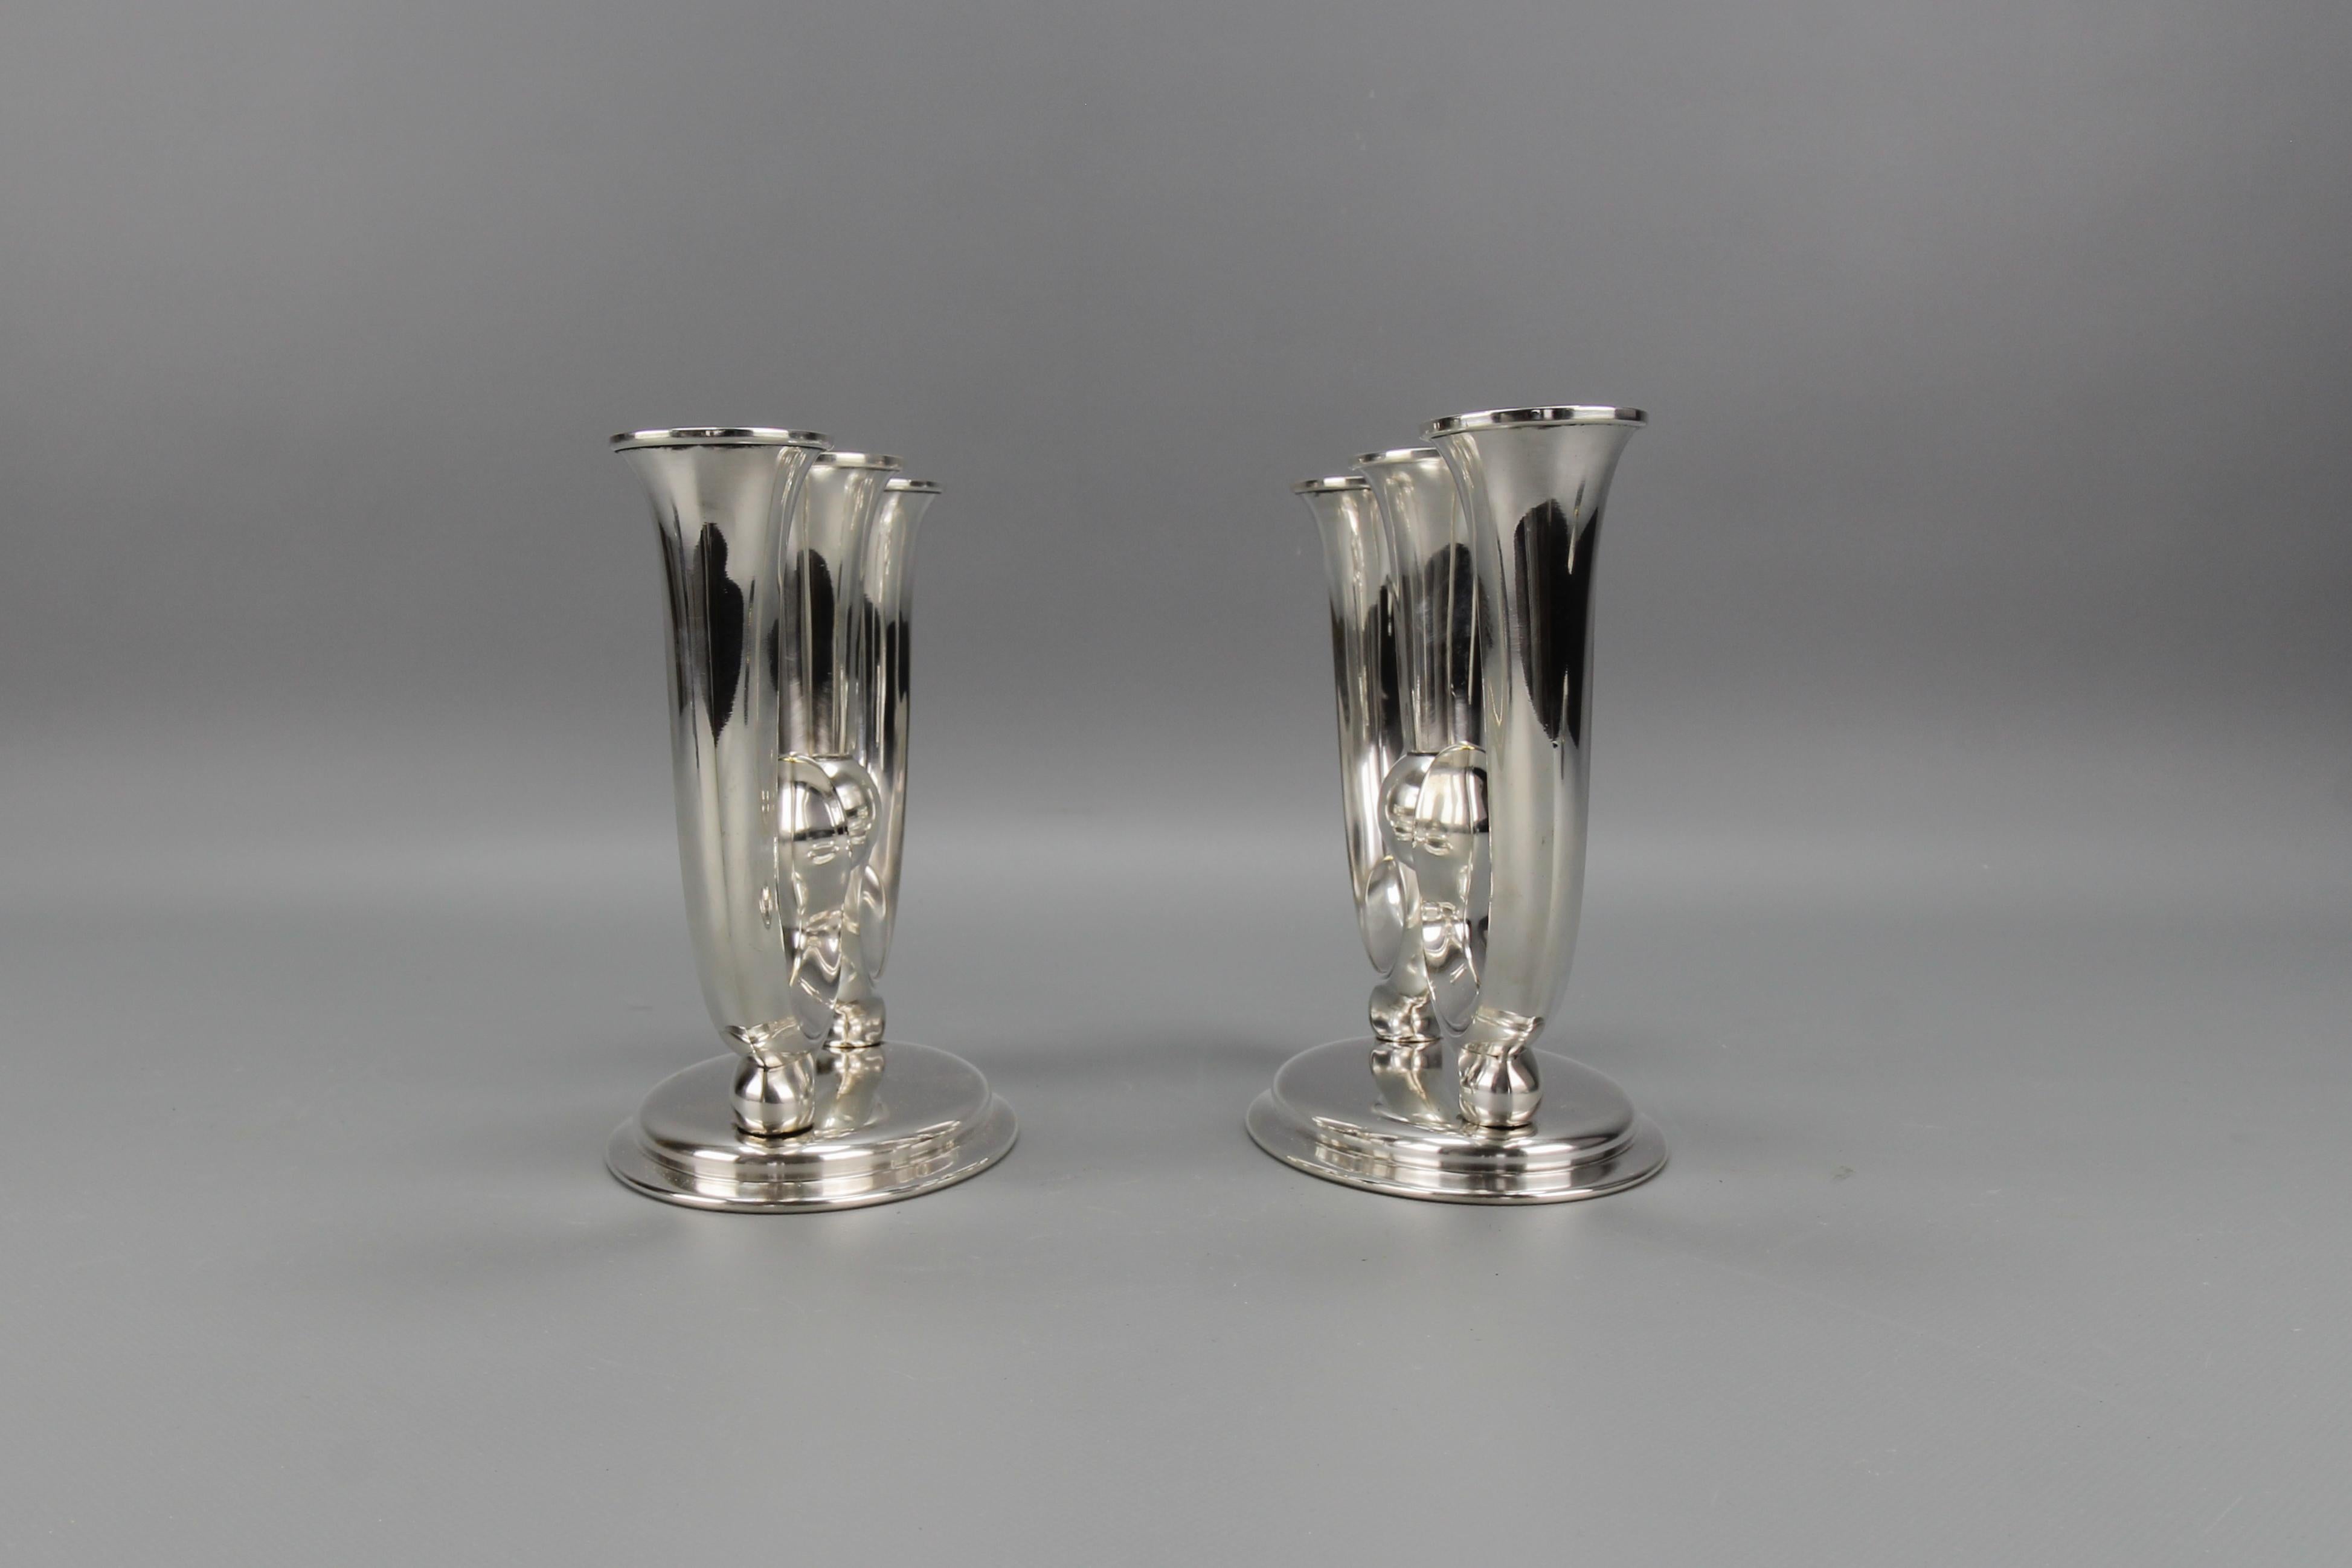 Pair of German WMF Art Deco Three-Arm Candle Holders For Sale 3